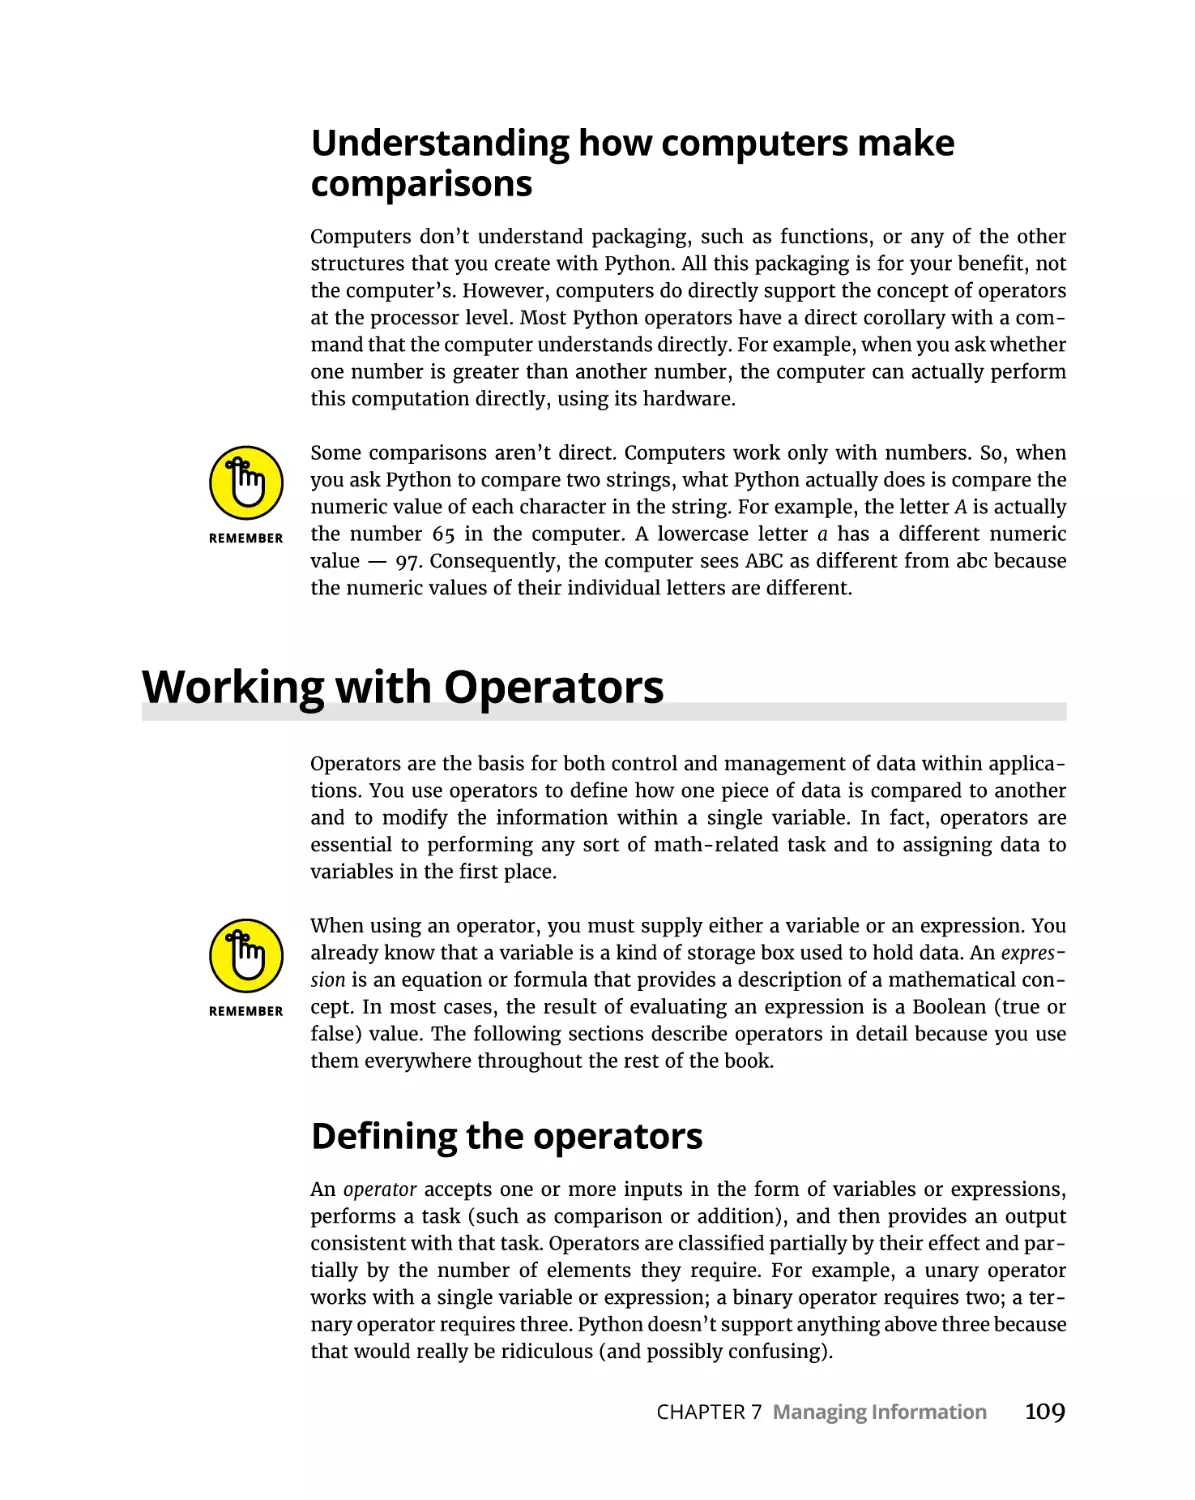 Understanding how computers make comparisons
Working with Operators
Defining the operators